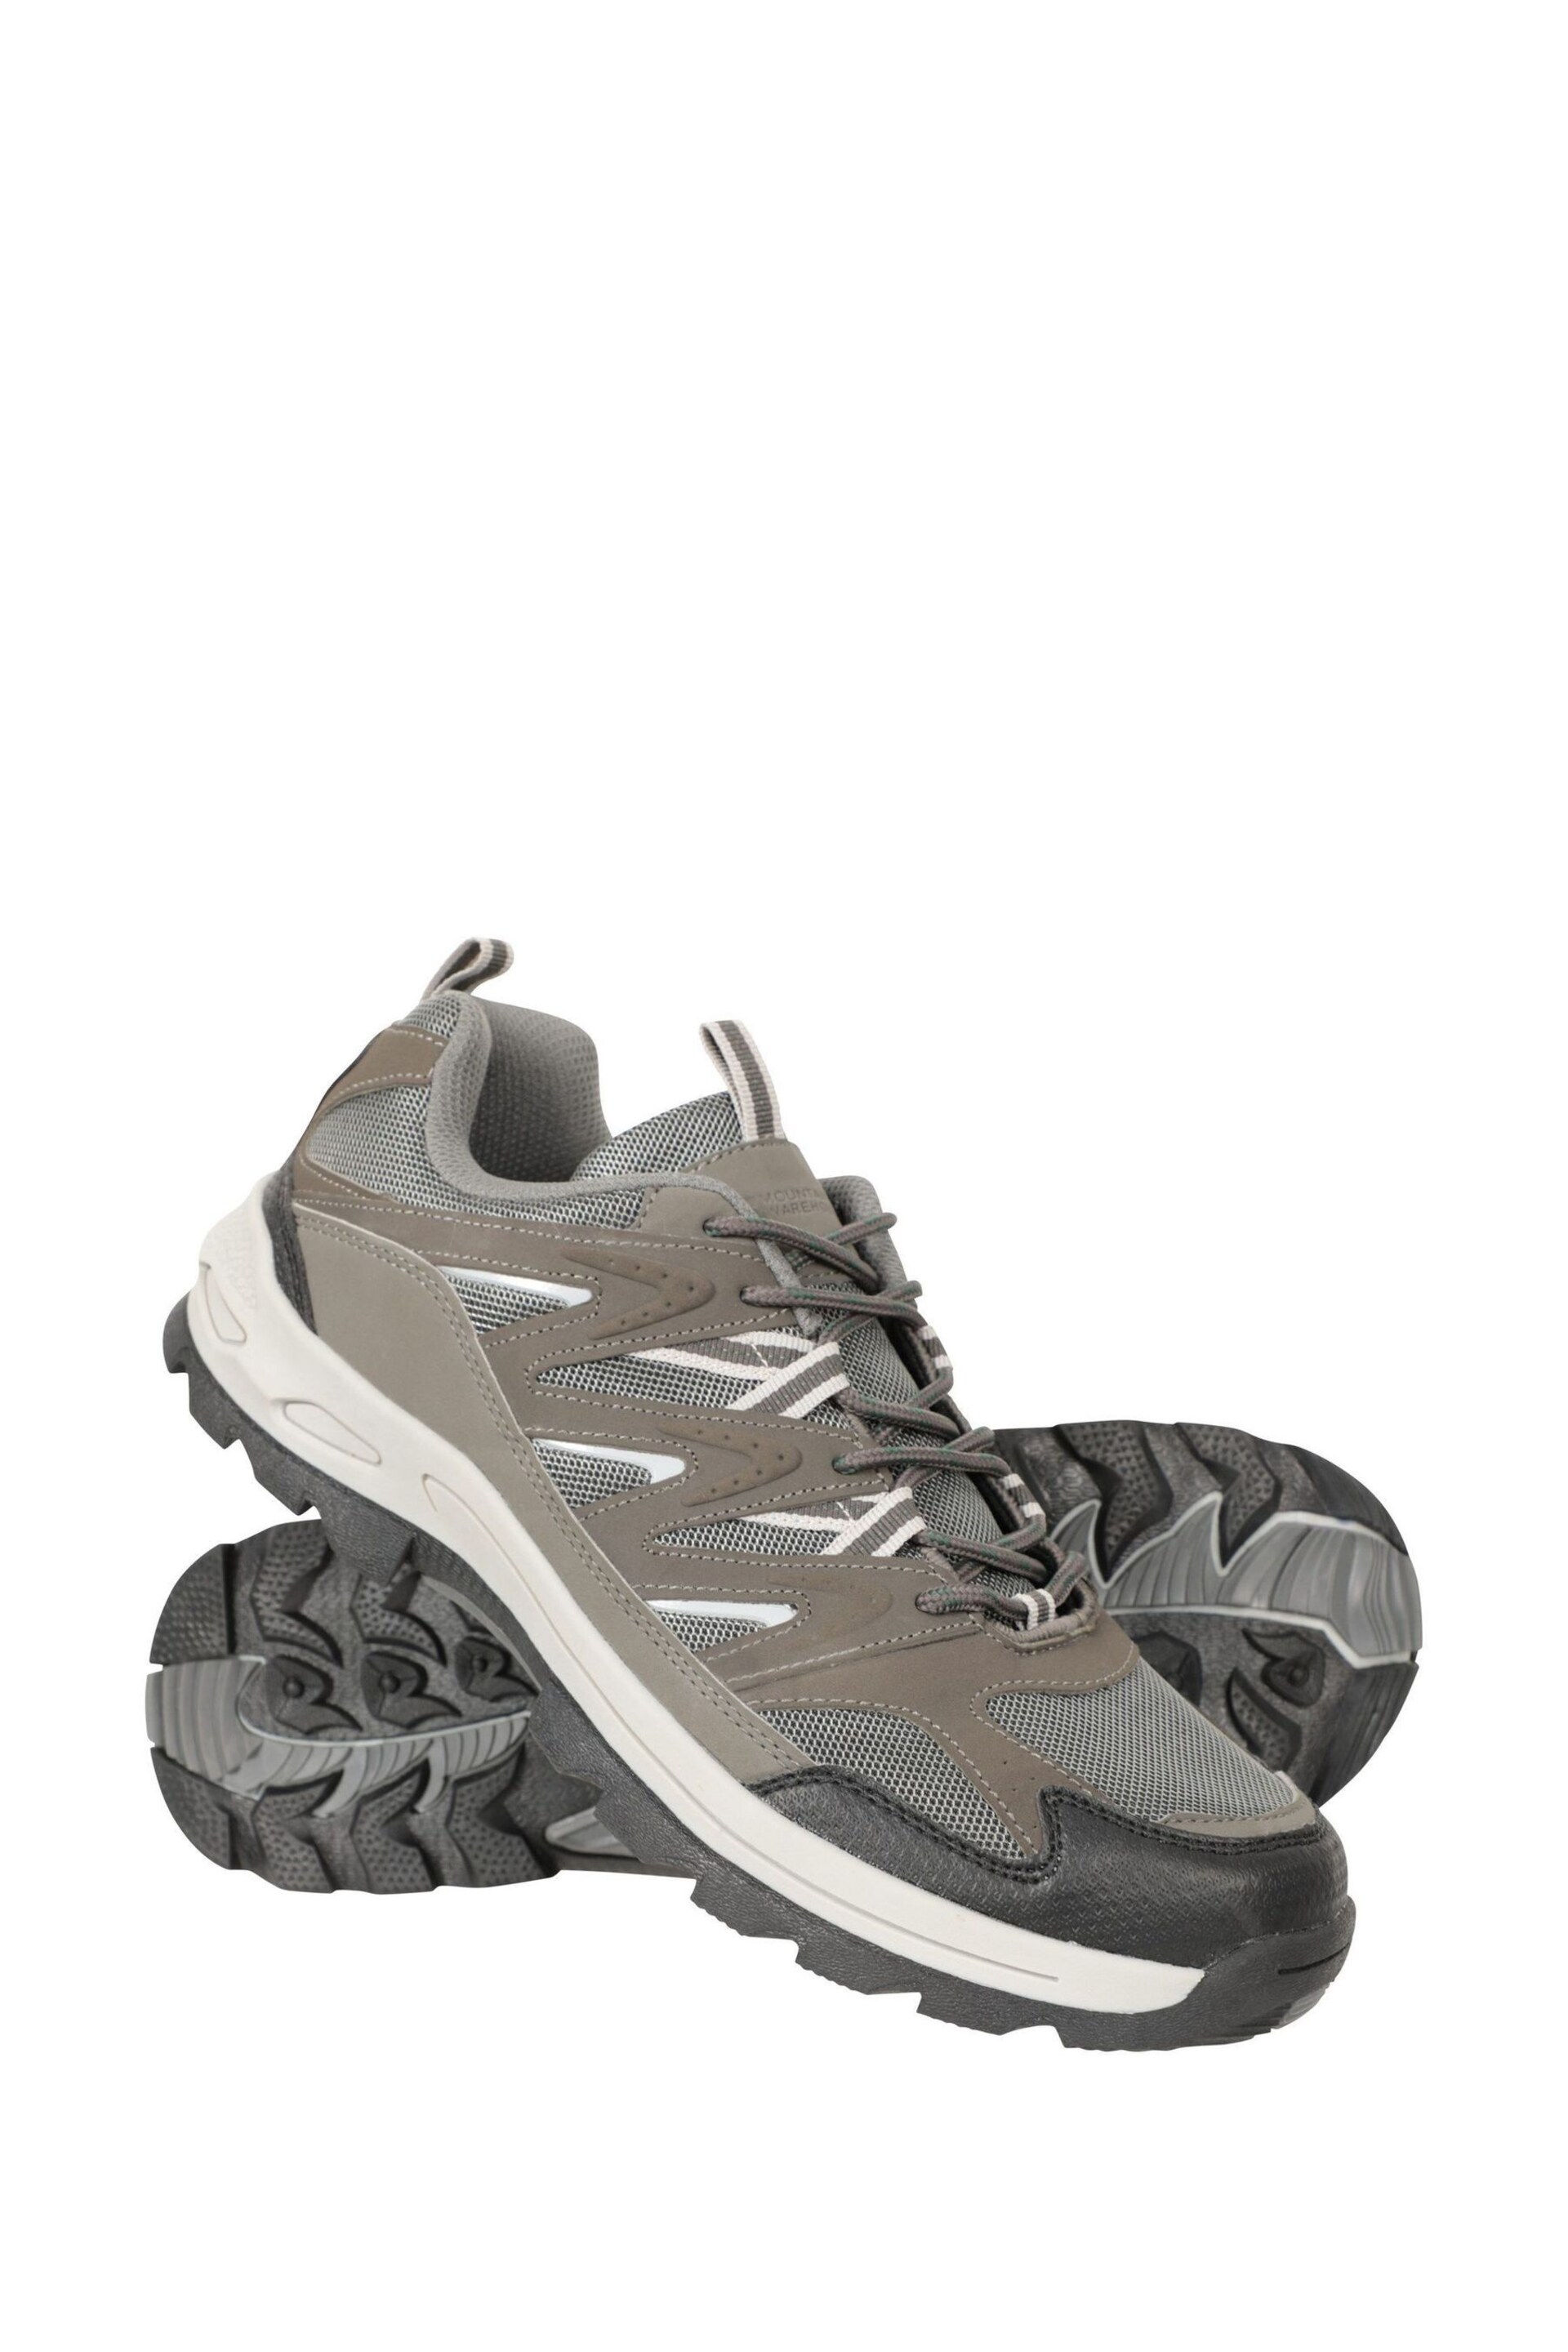 Mountain Warehouse Grey Mens Highline II Shoes - Image 1 of 5